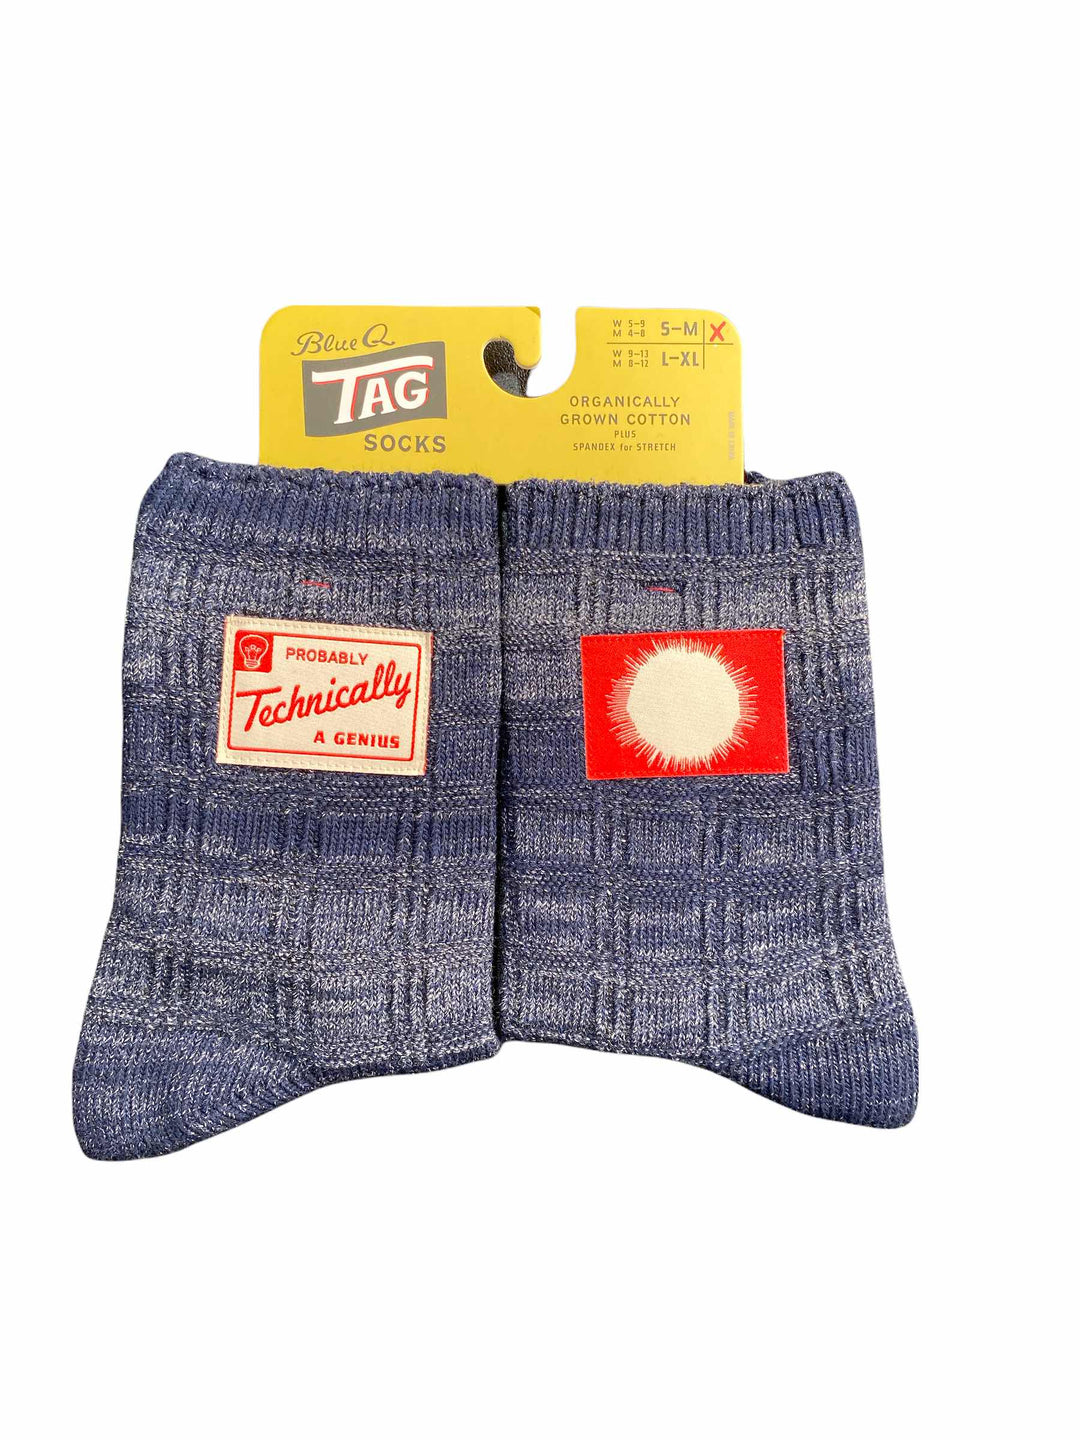 PROBABLY TECHNALLY A GENIUS TAG SOCKS - Kingfisher Road - Online Boutique